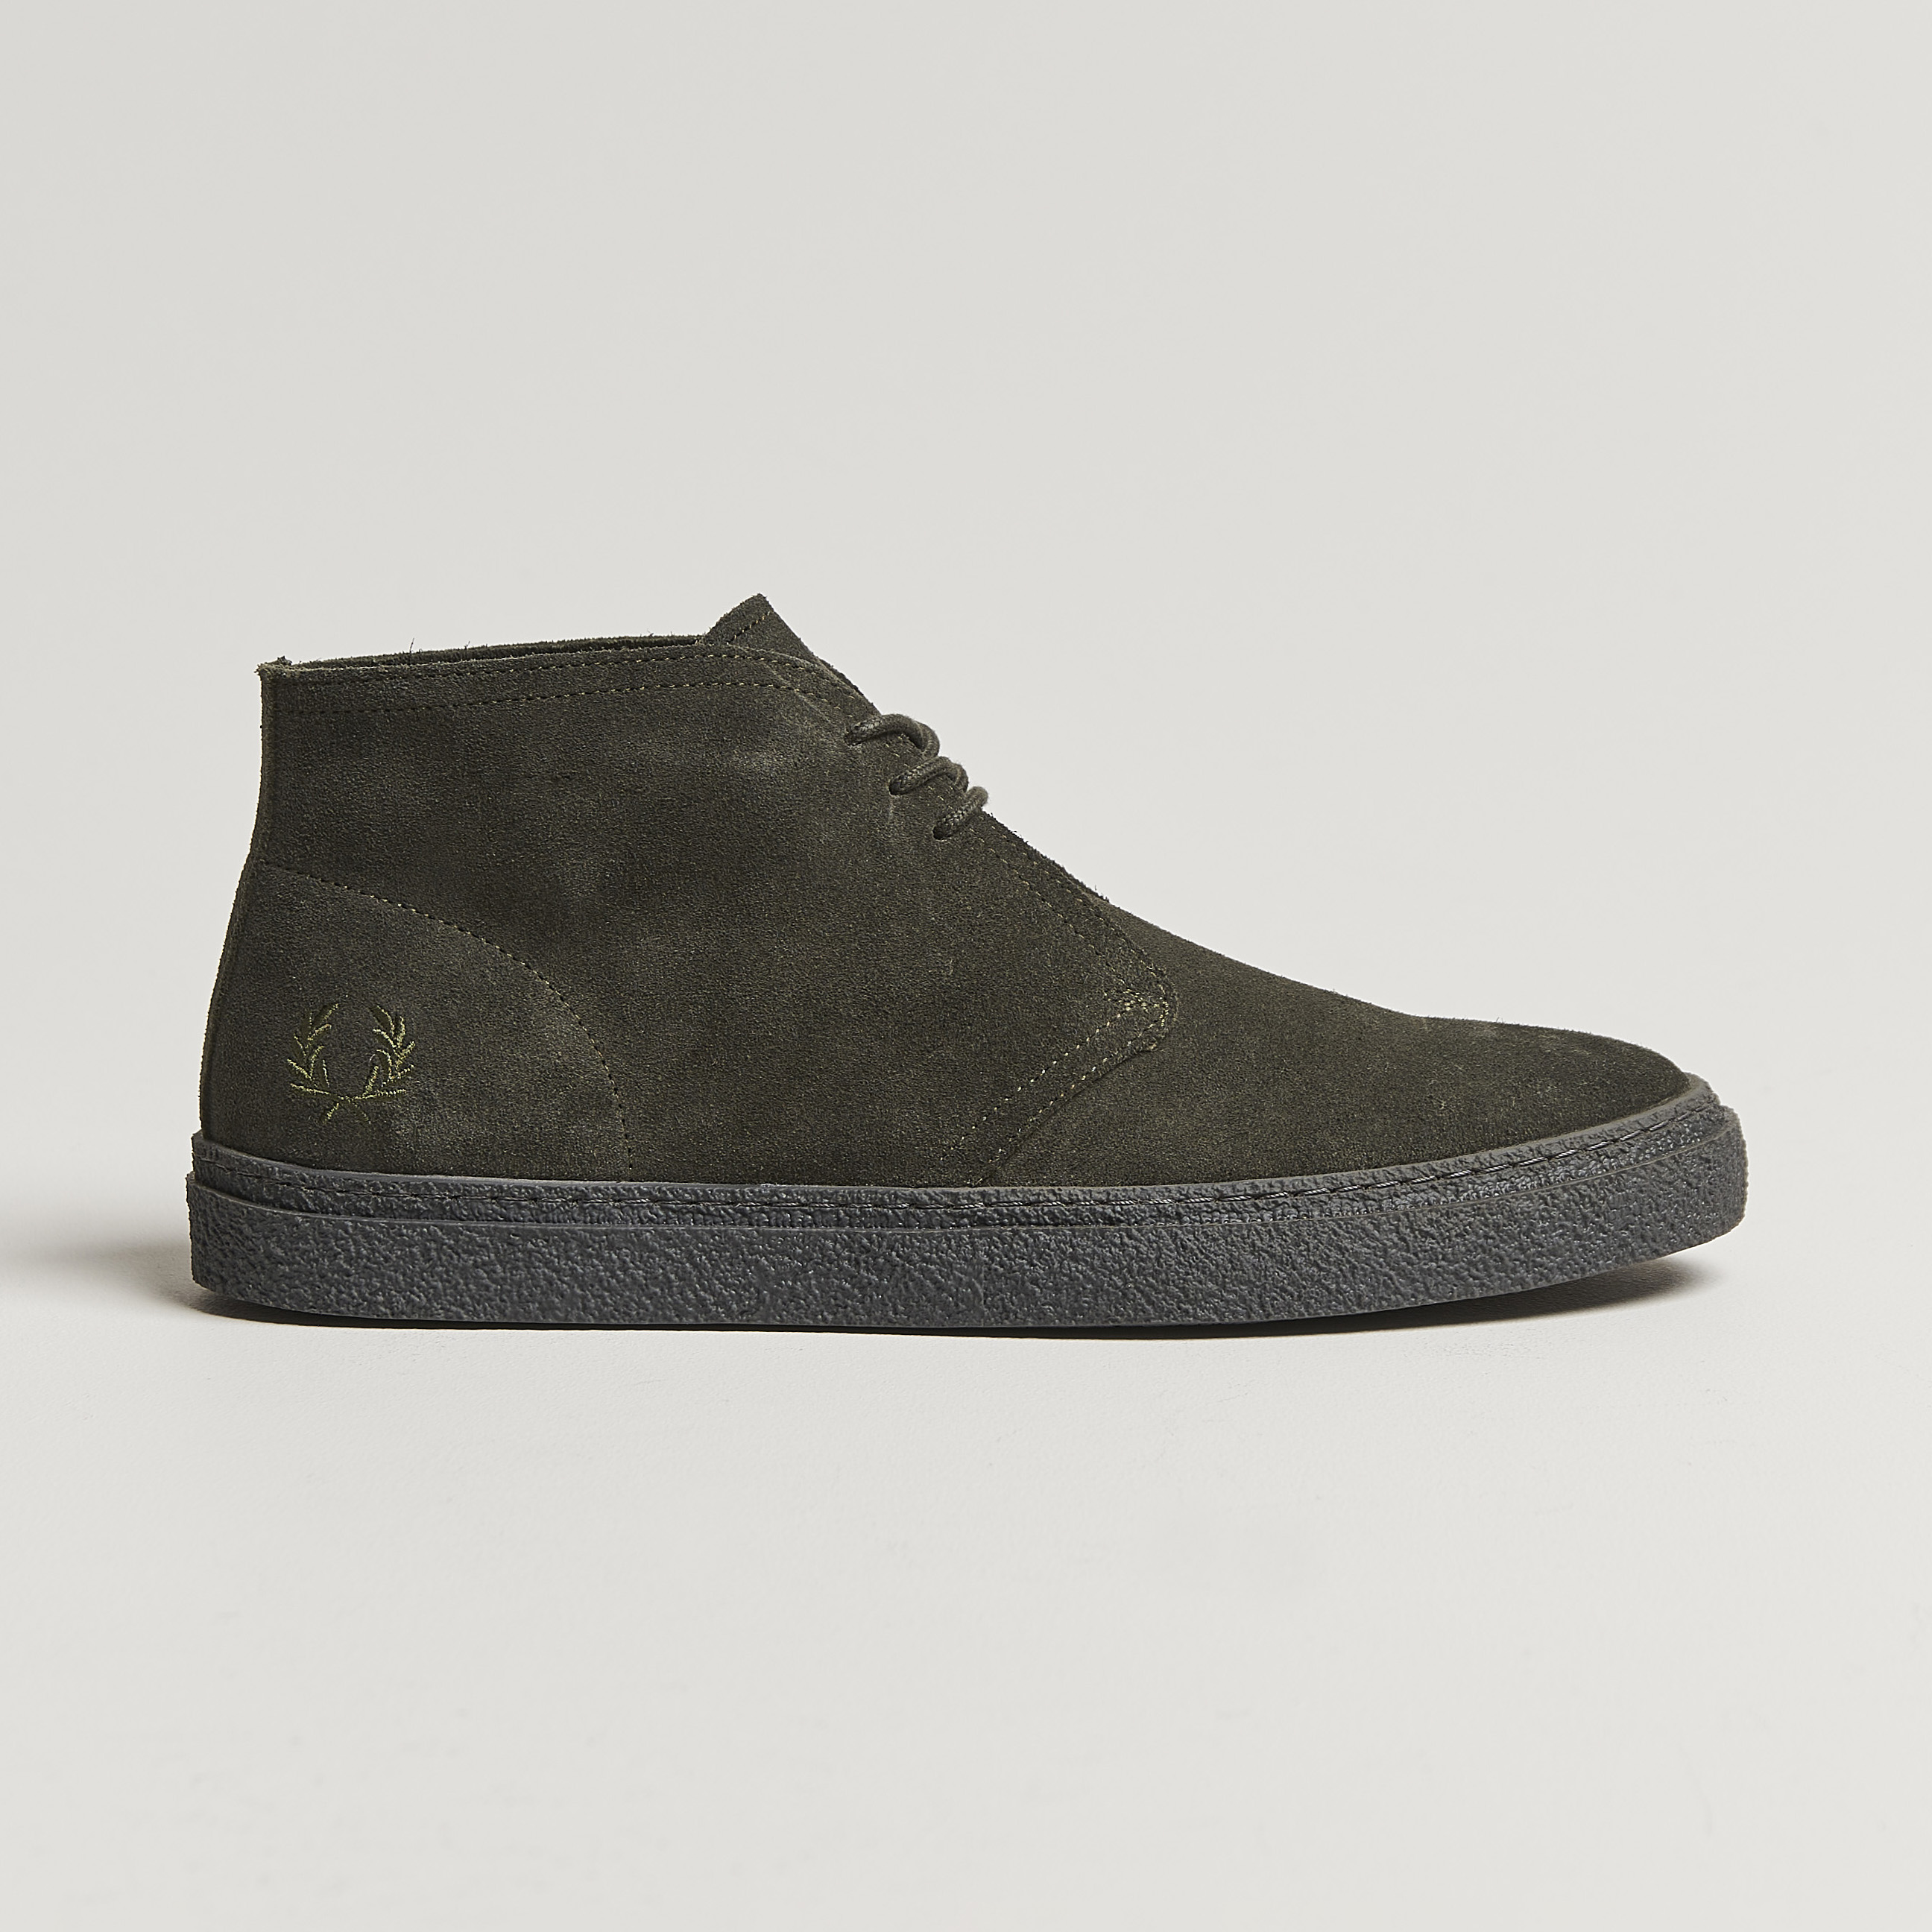 Fred Perry Hawley Suede Chukka Boot Field Green at CareOfCarl.com